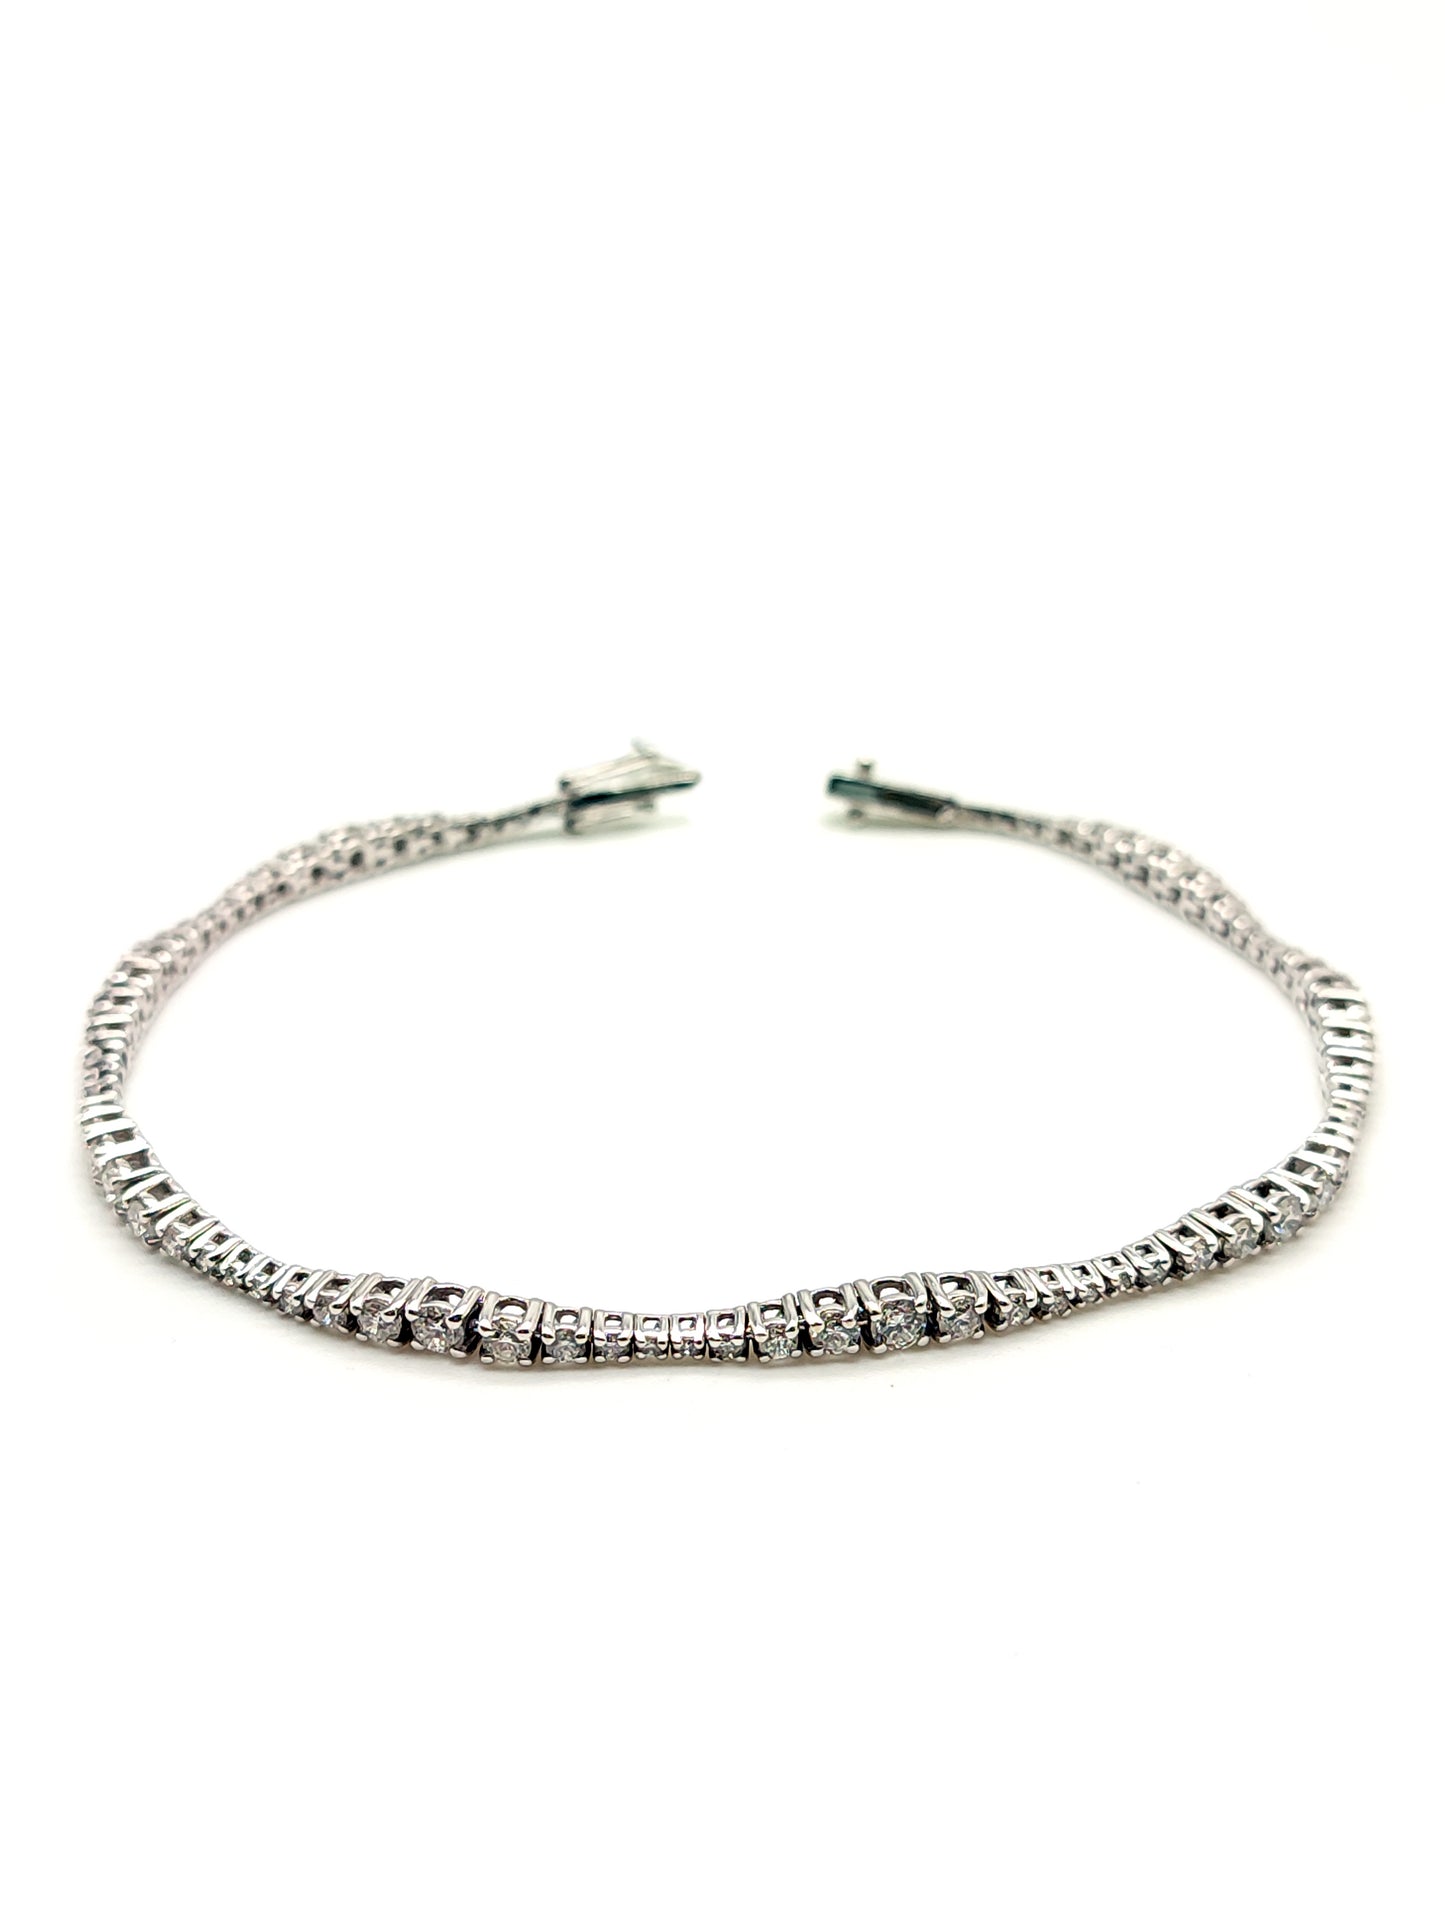 Gold scaled tennis bracelet with 1.18ct diamonds